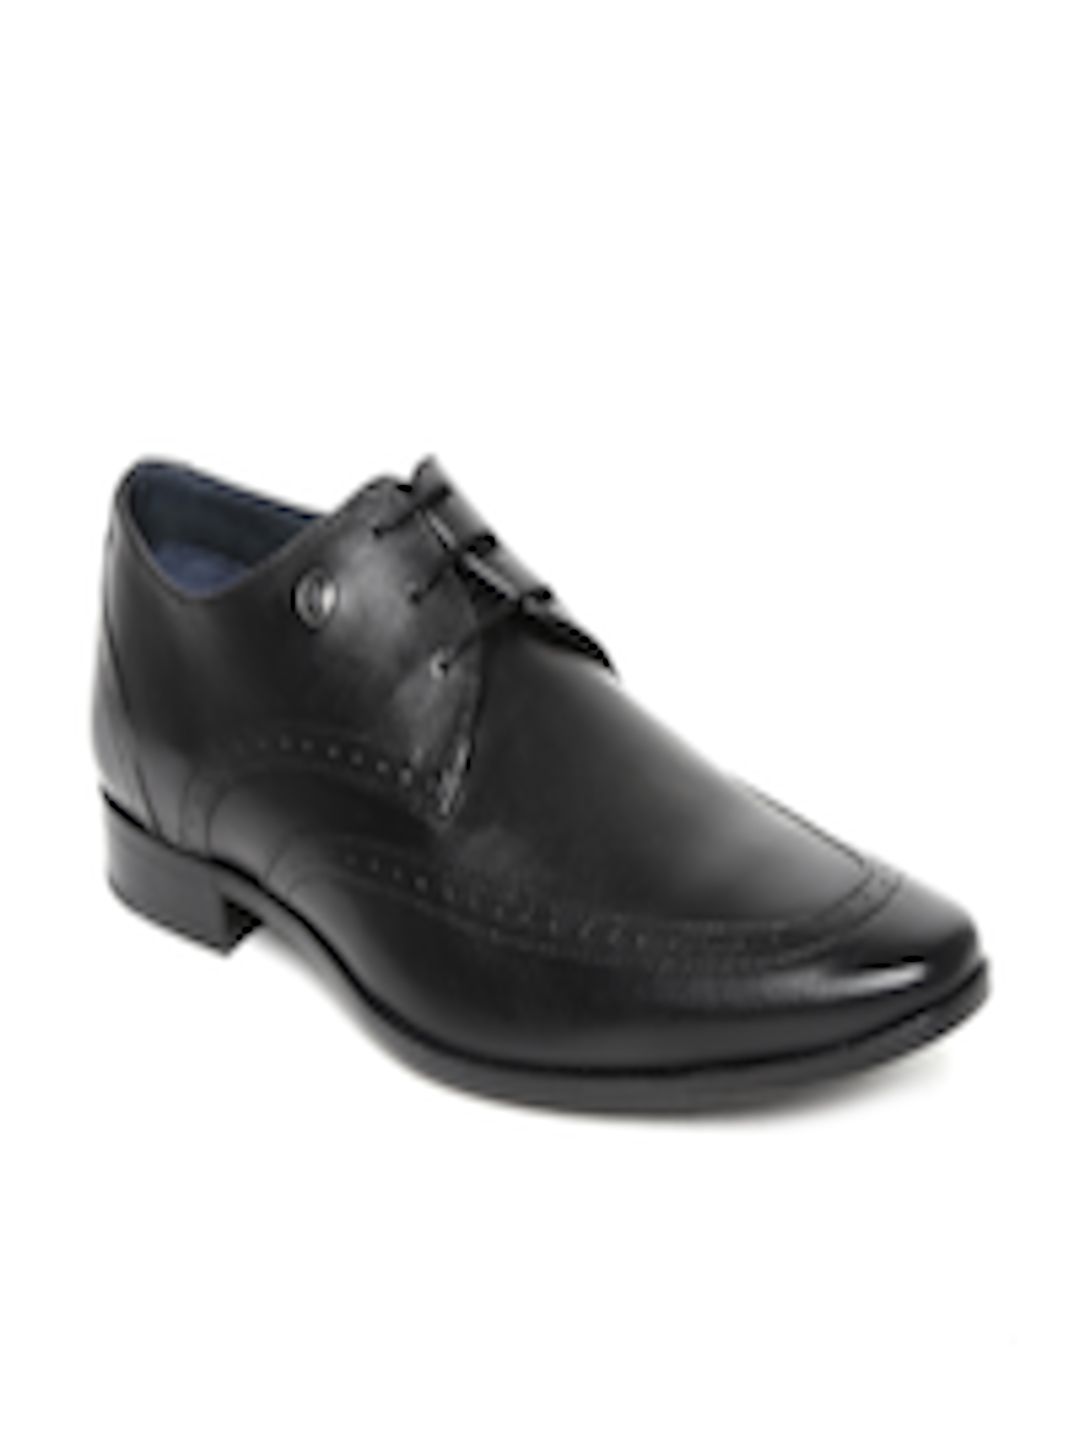 Buy Louis Philippe Men Black Leather Formal Shoes - Formal Shoes for Men 1327177 | Myntra